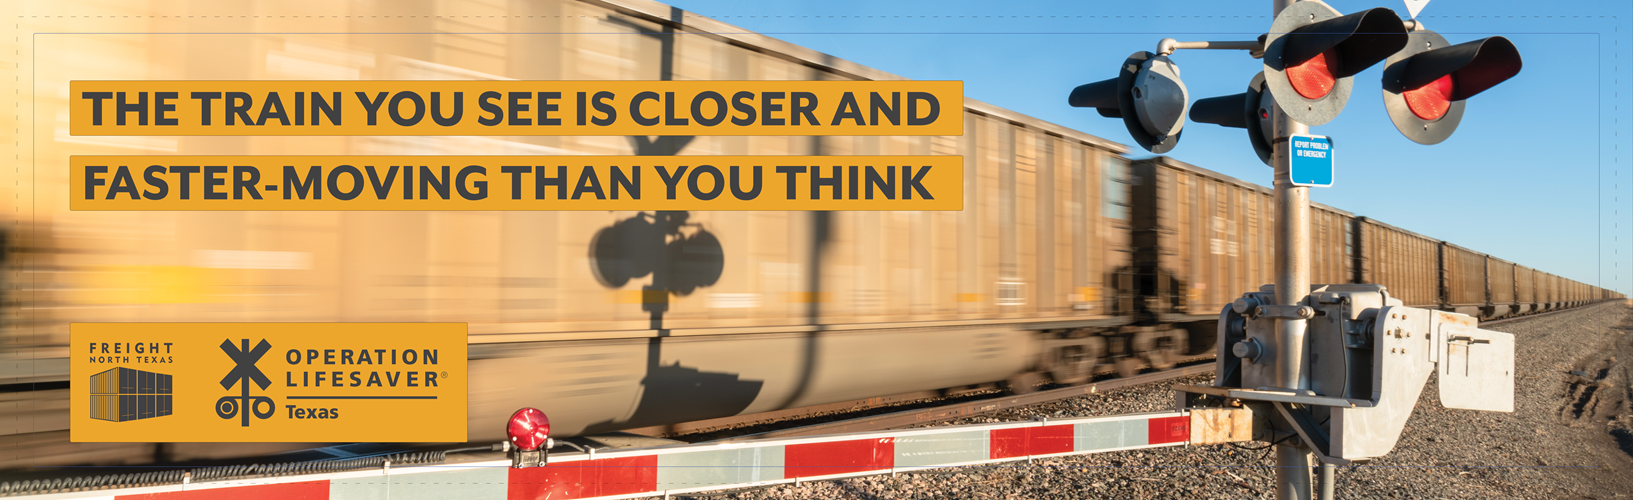 Railroad crossing with training moving by and phrase The train you see is closer and faster-moving than you think